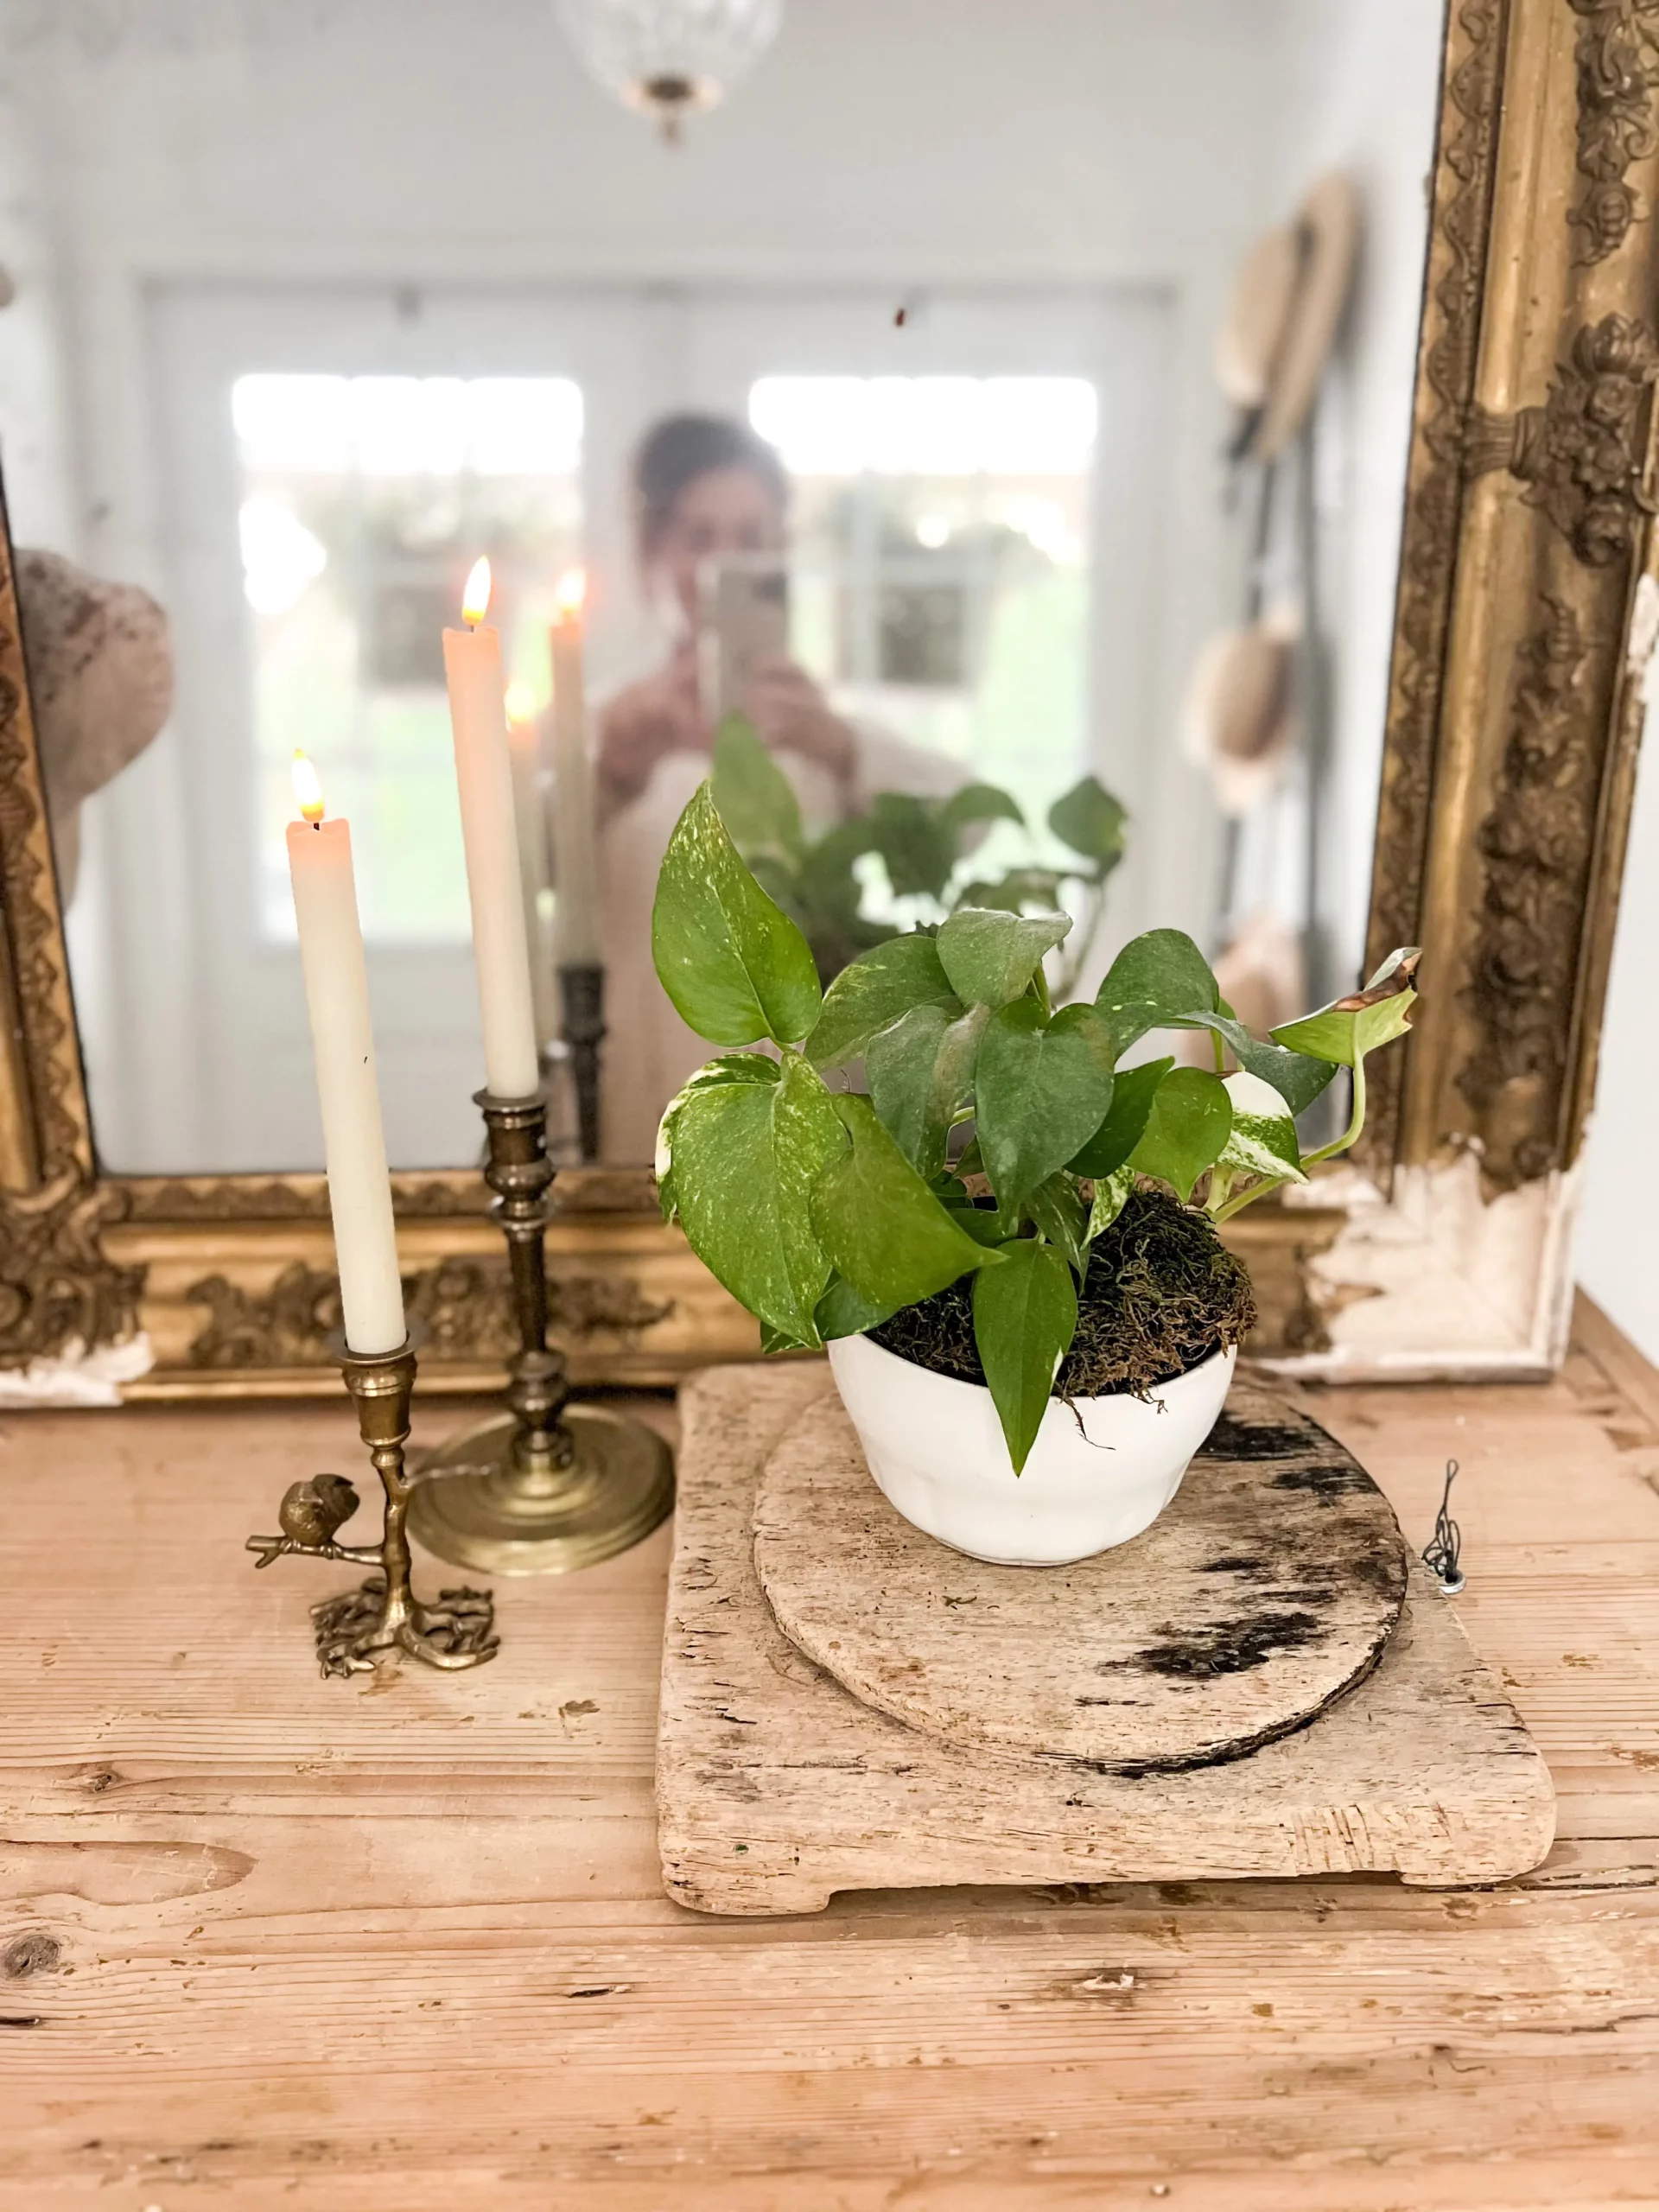 beautiful vignette with brass candlesticks holding flameless taper candles with a pathos plant in an ironstone planter next to them